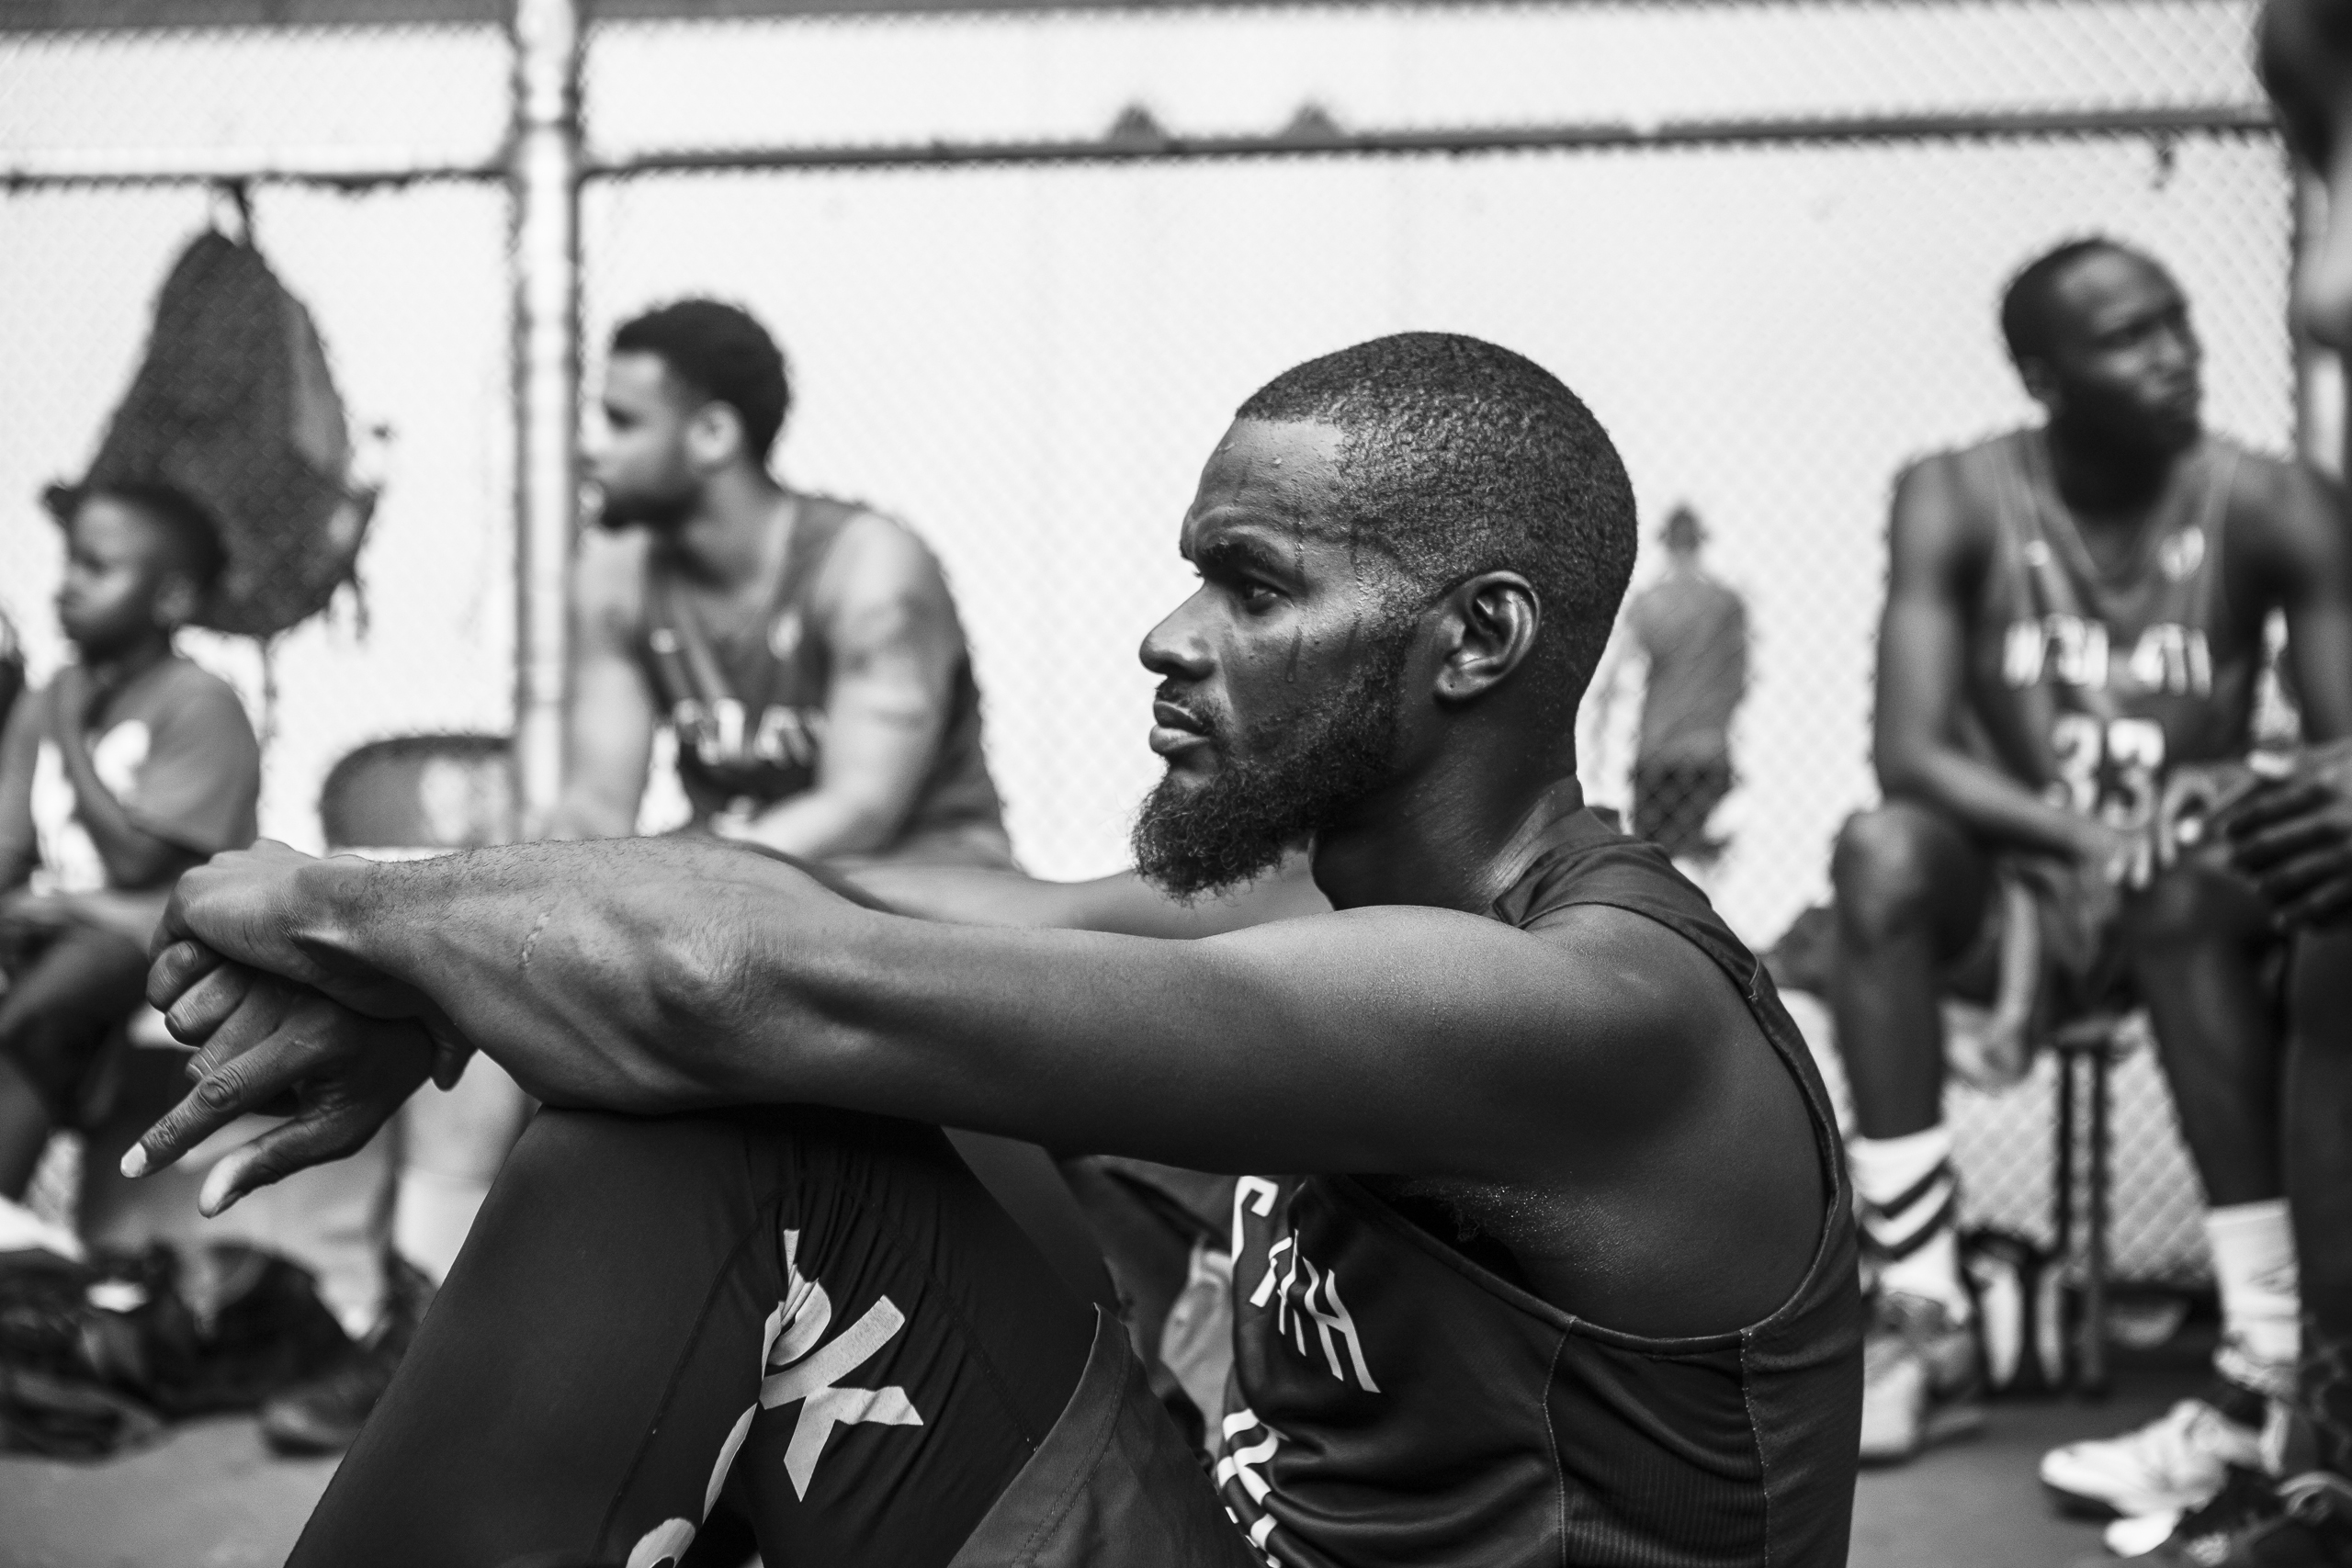 A player from the Men's division of the West 4th Street Basketball League in New York City on July 03, 2015.